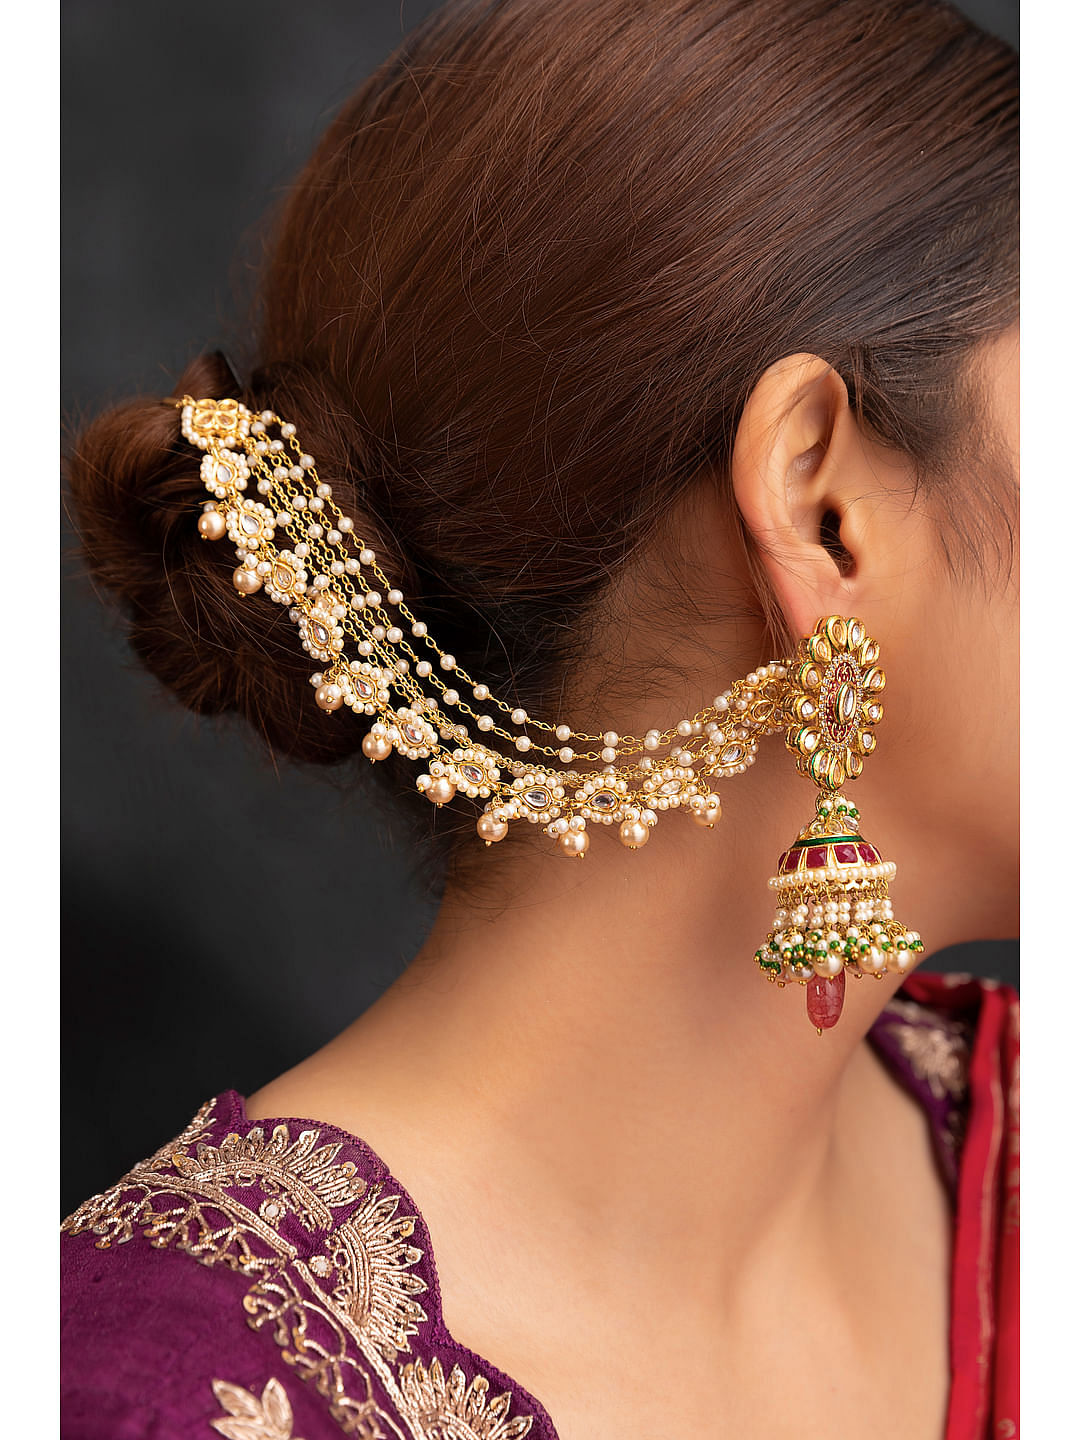 Aggregate more than 104 gold kaan earrings